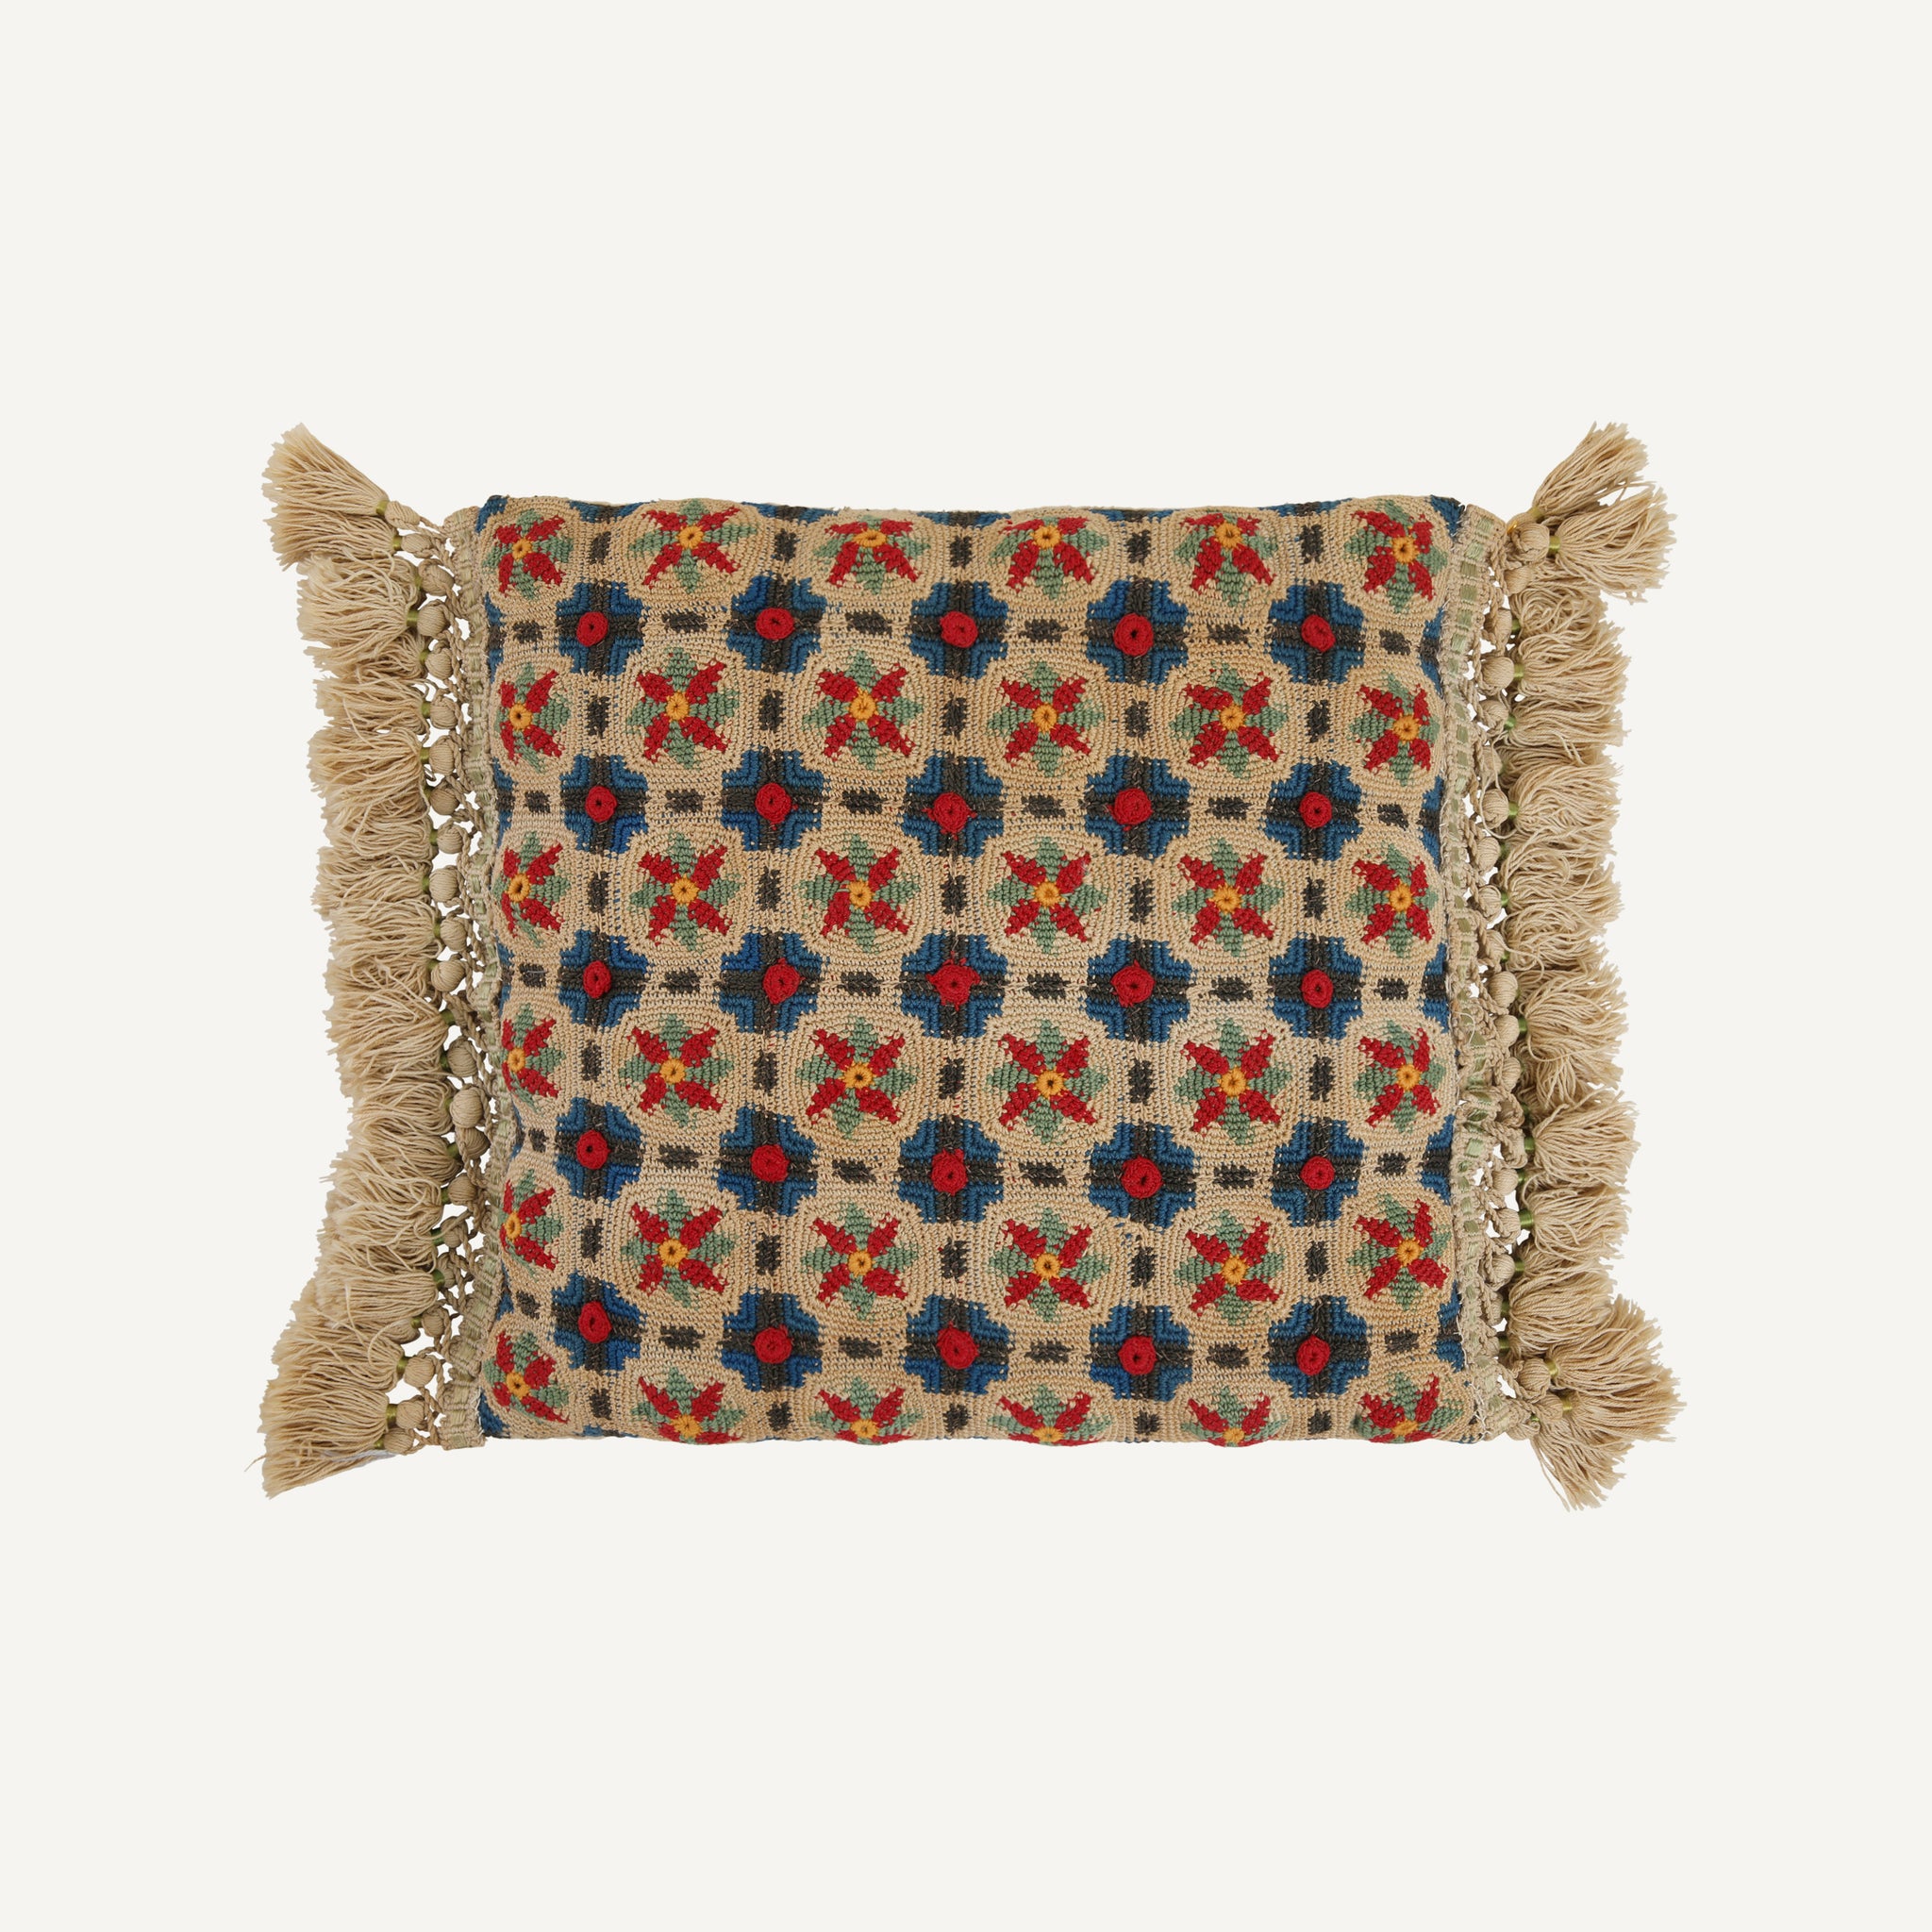 ANTIQUE FINELY CROCHETED PILLOW